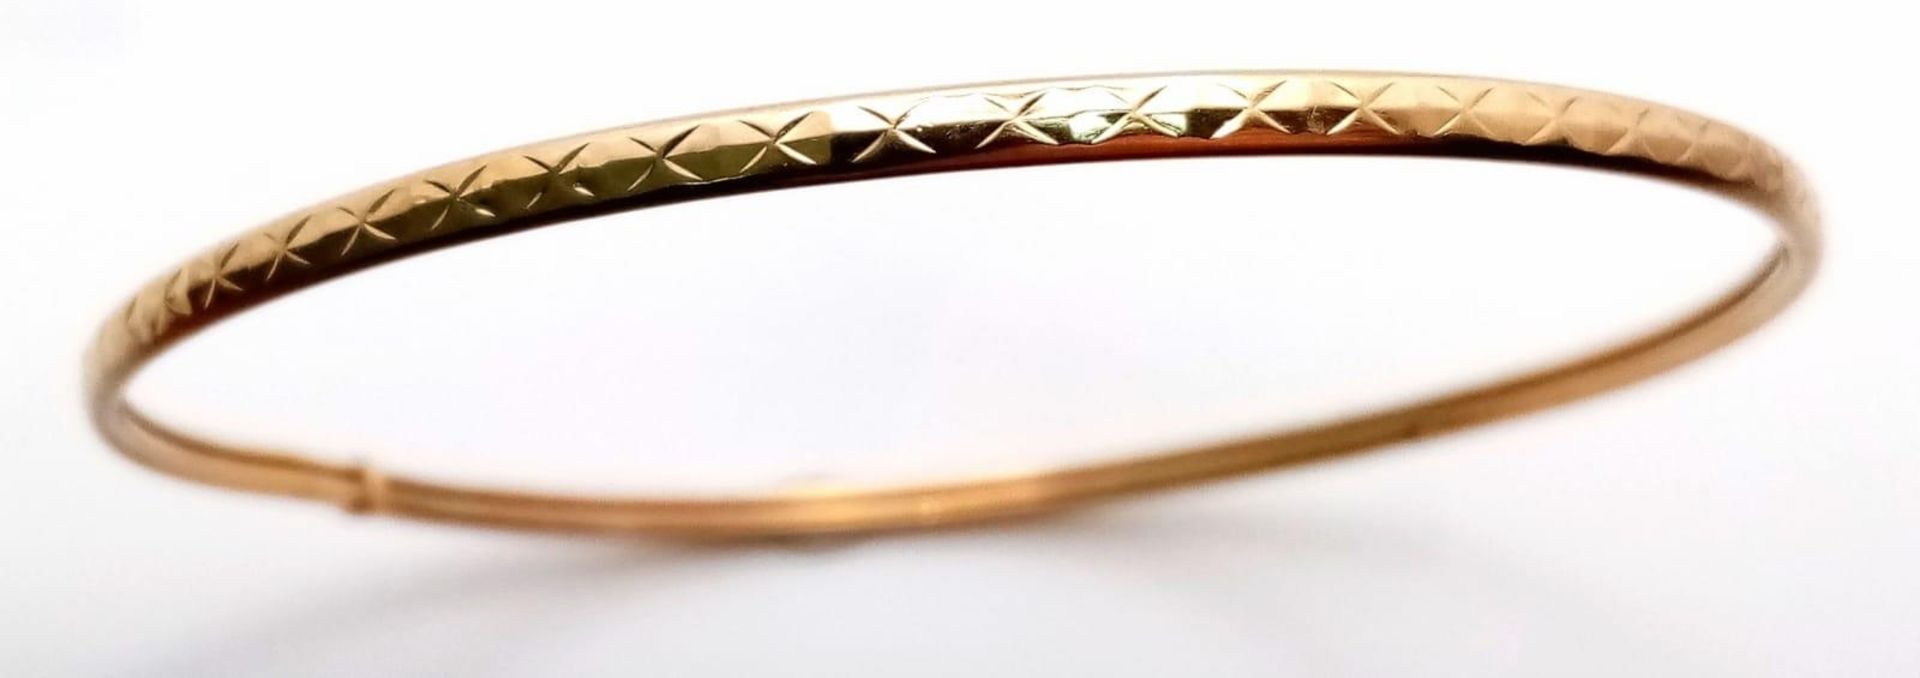 Set of 2x 9K Yellow Gold (tested as) Patterned Bangle , 6.1g total weight, 6.5cm diameter - Image 2 of 3